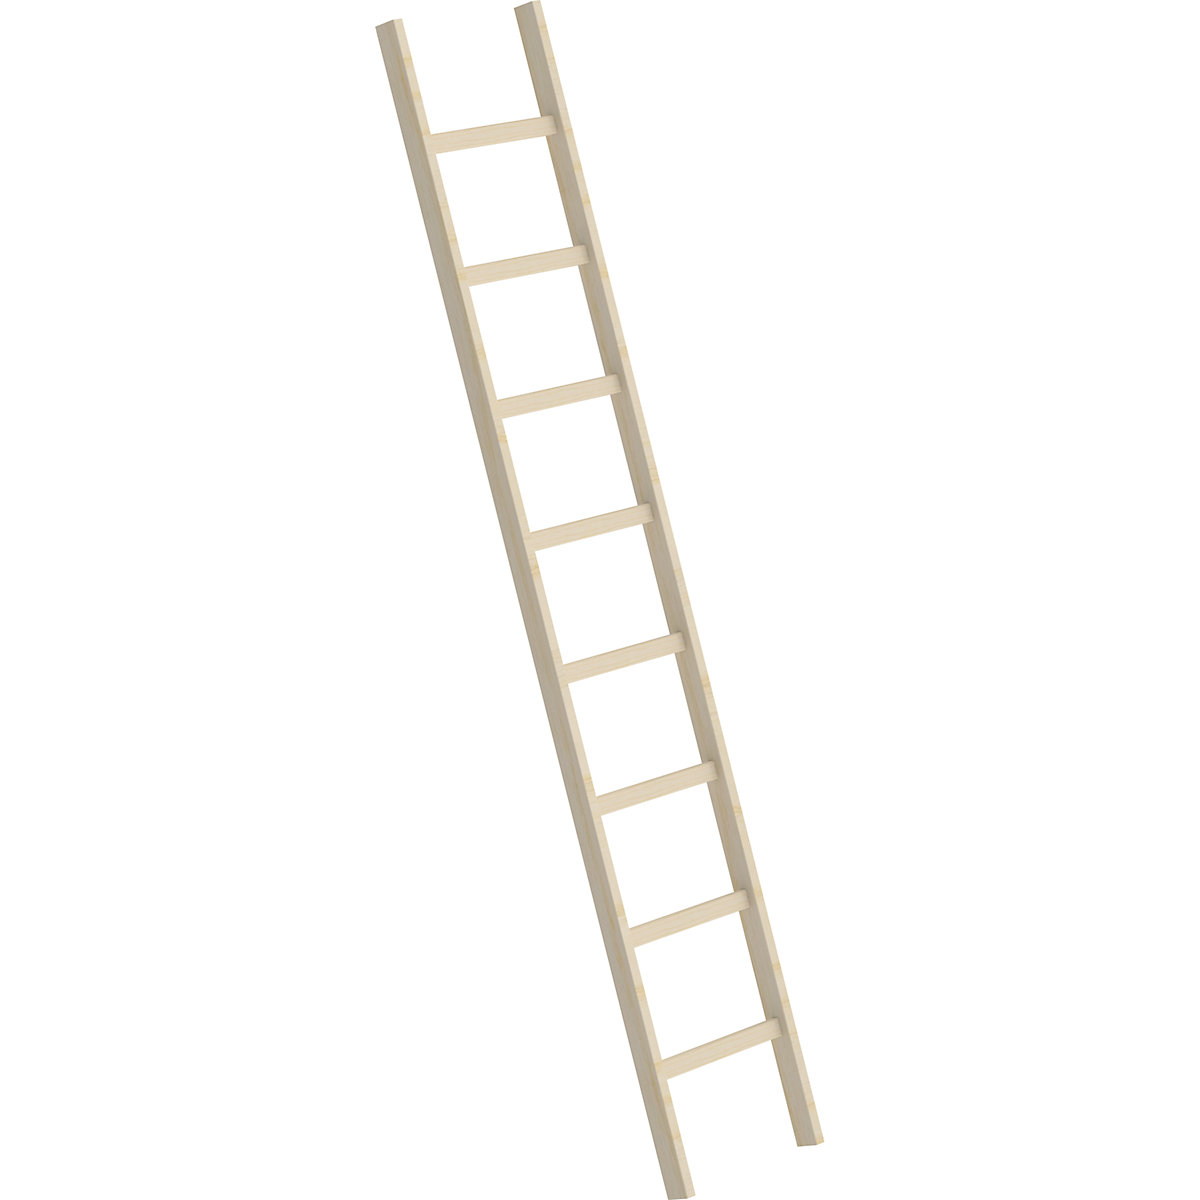 Wooden lean to ladder – MUNK, with rungs, 8 rungs-1